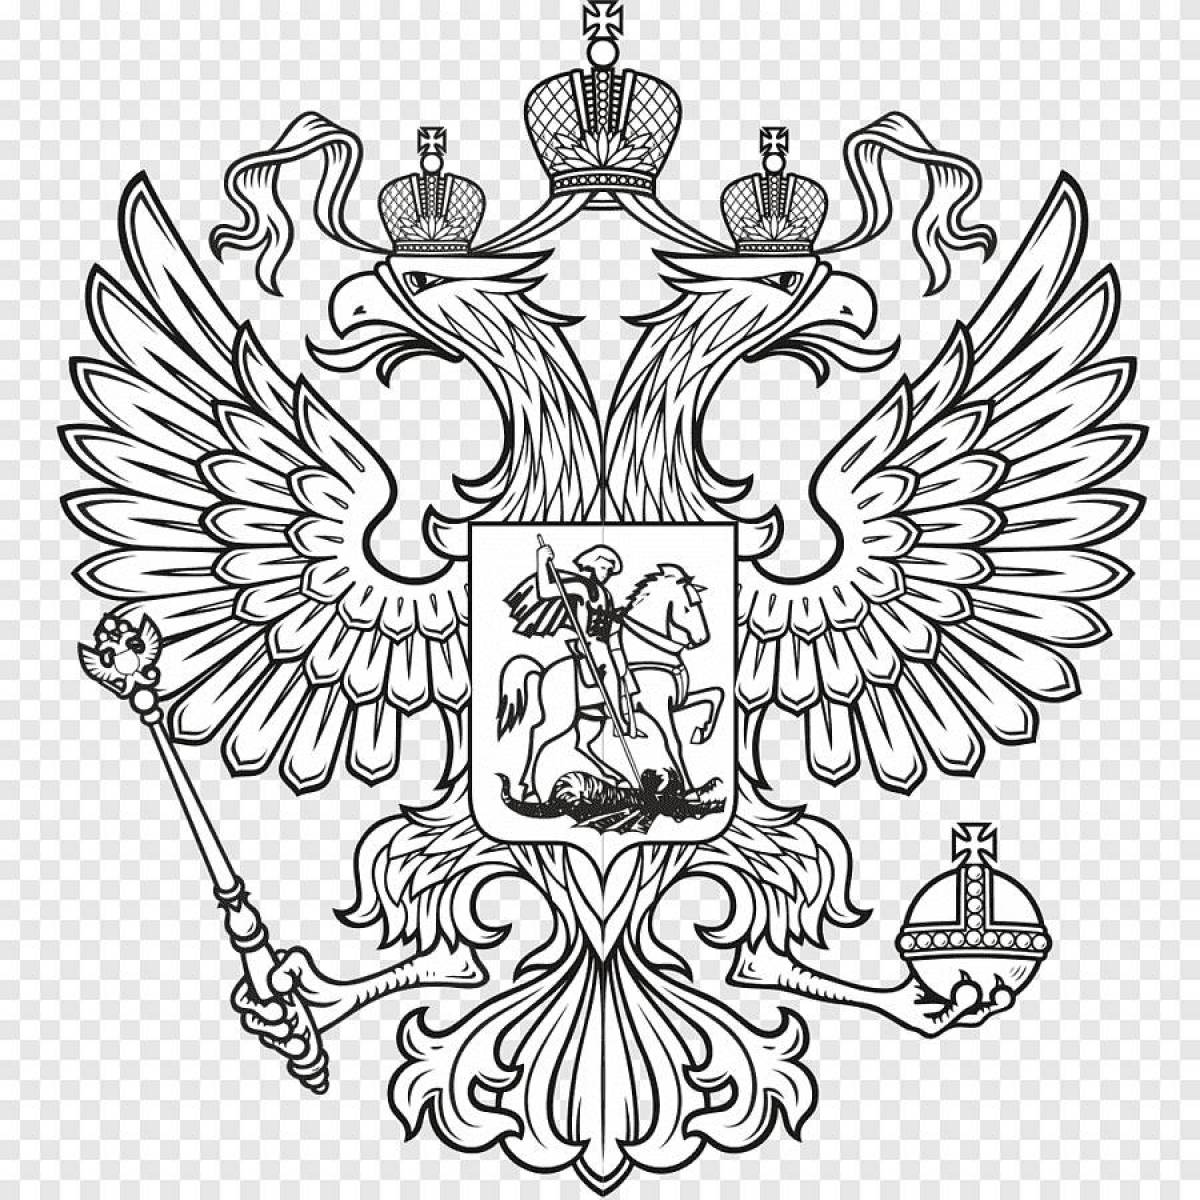 Radiant coat of arms of Russia for youth